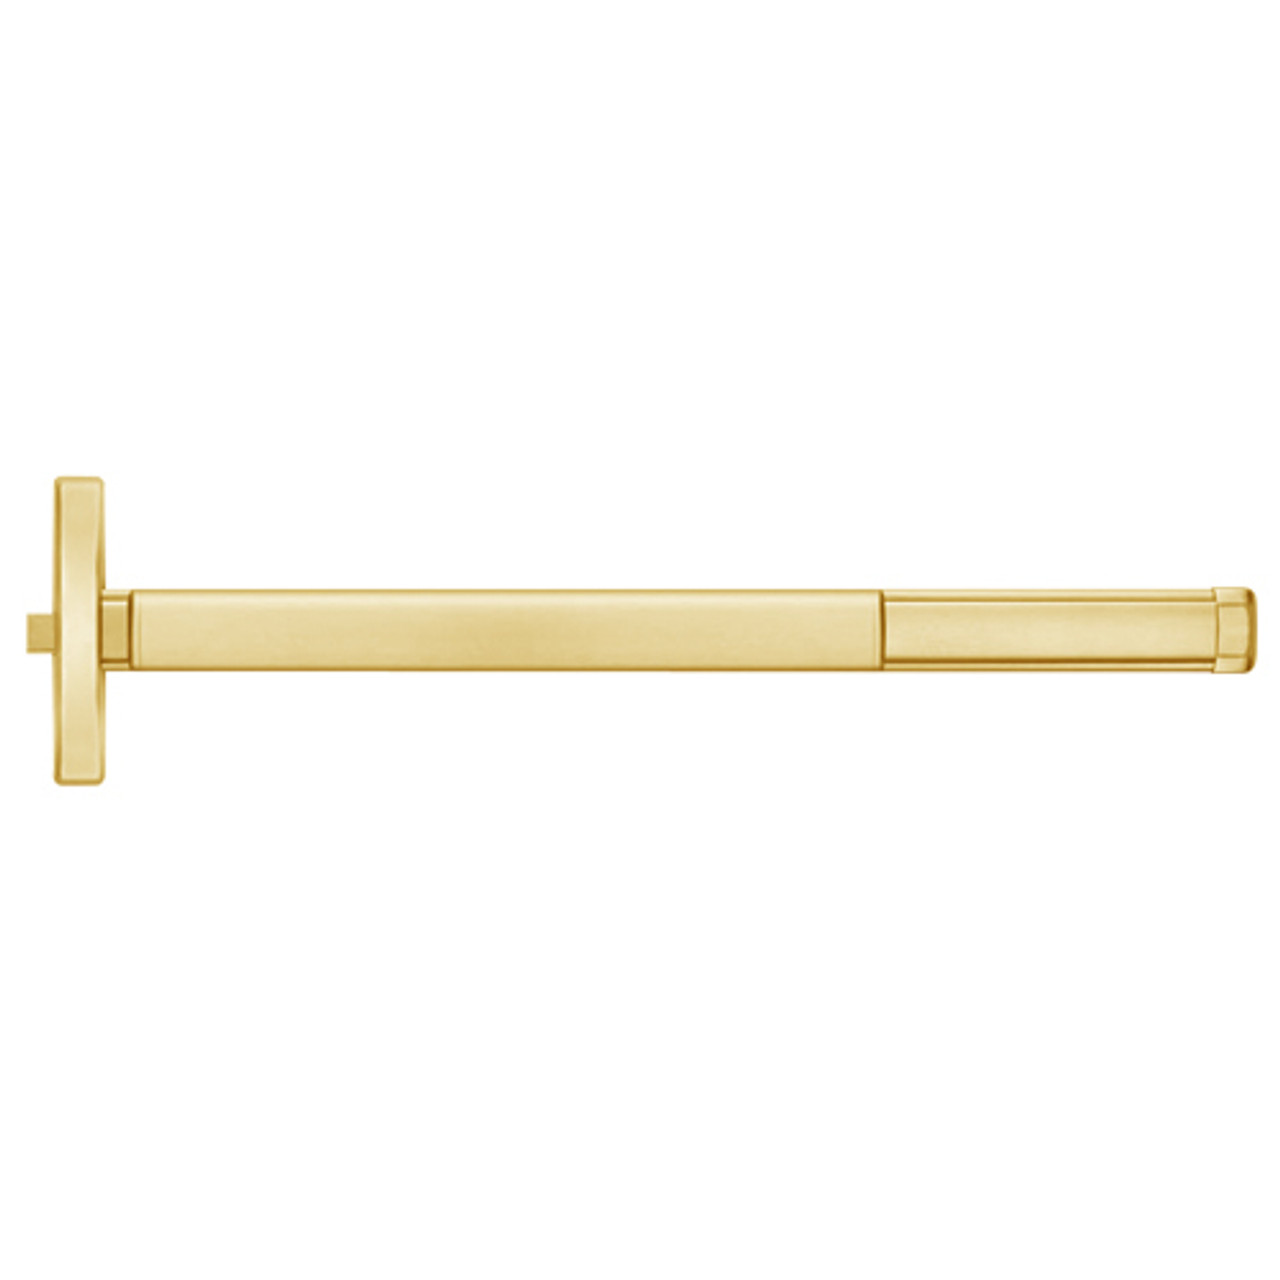 ELRFL2408-605-36 PHI 2400 Series Fire Rated Apex Rim Exit Device with Electric Latch Retraction Prepped for Key Controls Lever in Bright Brass Finish